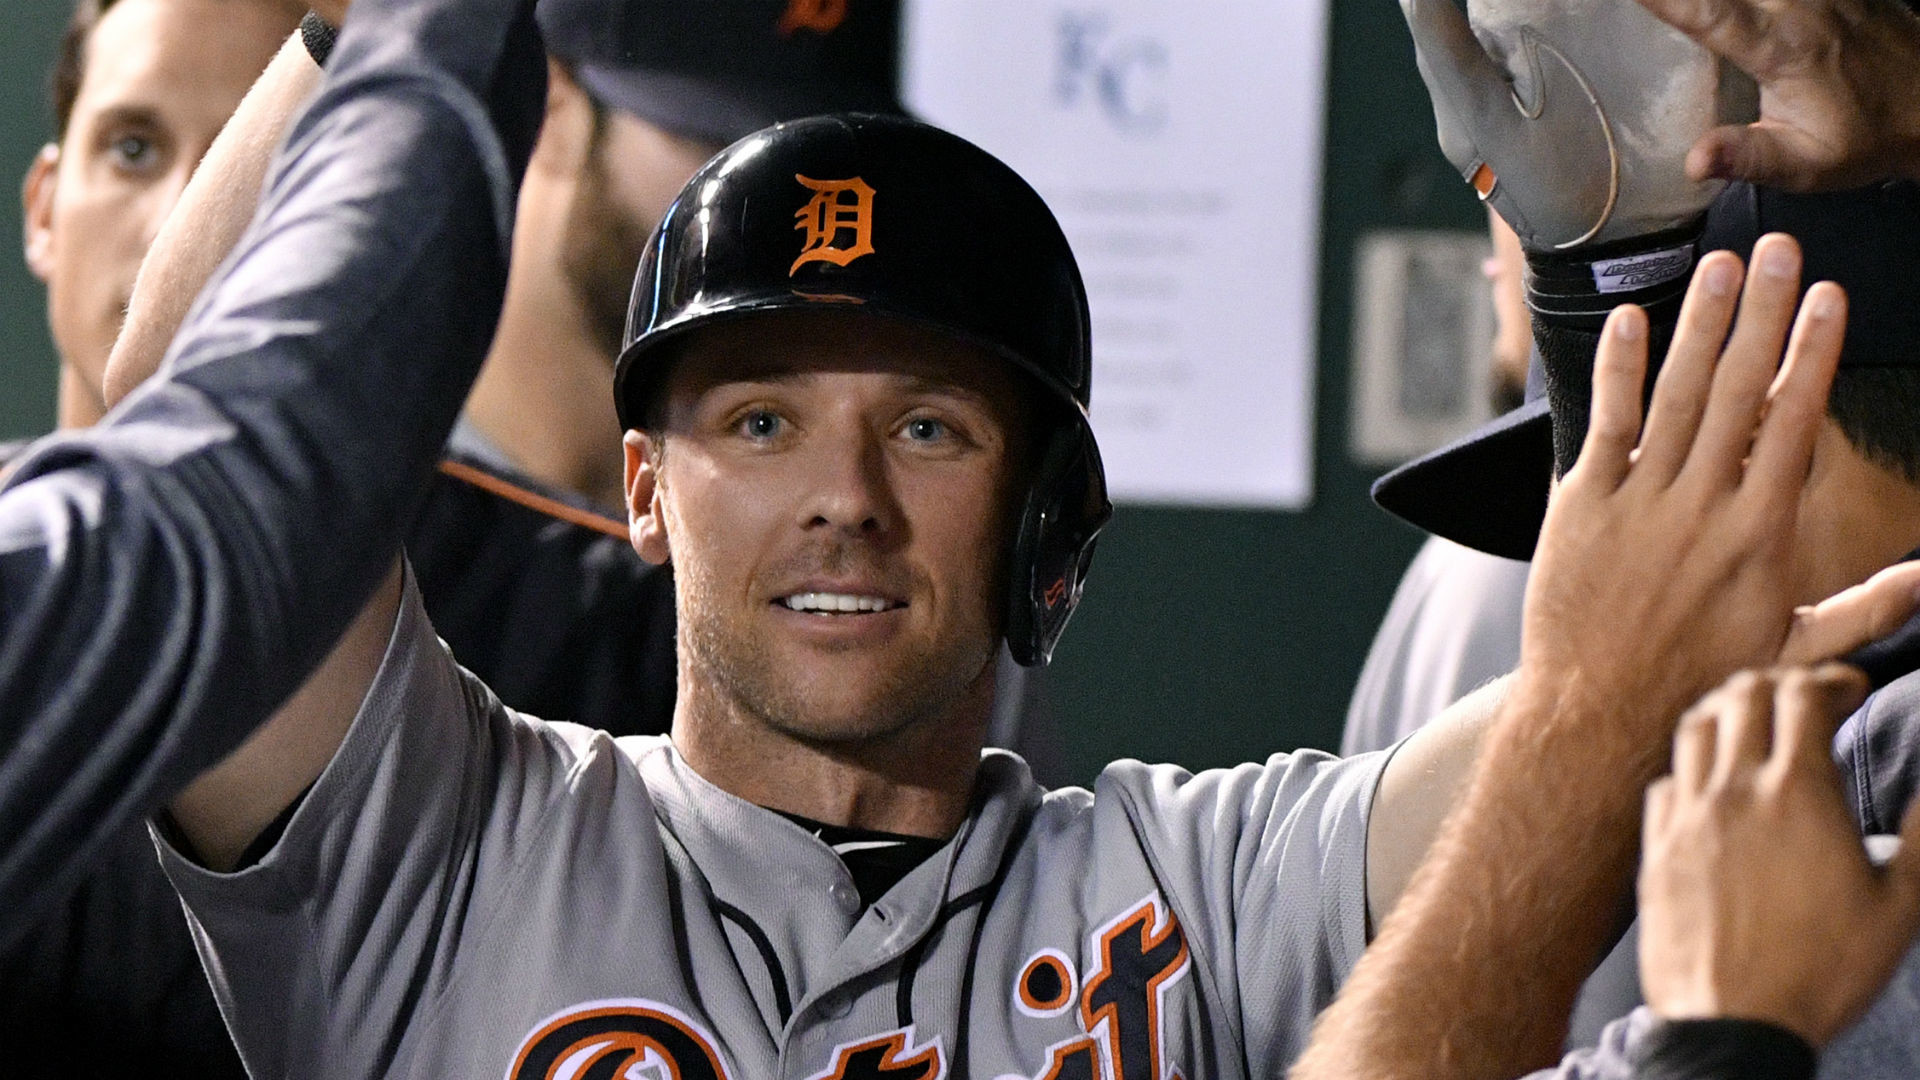 1920x1080 Tigers' Andrew Romine plays all nine positions against Twins